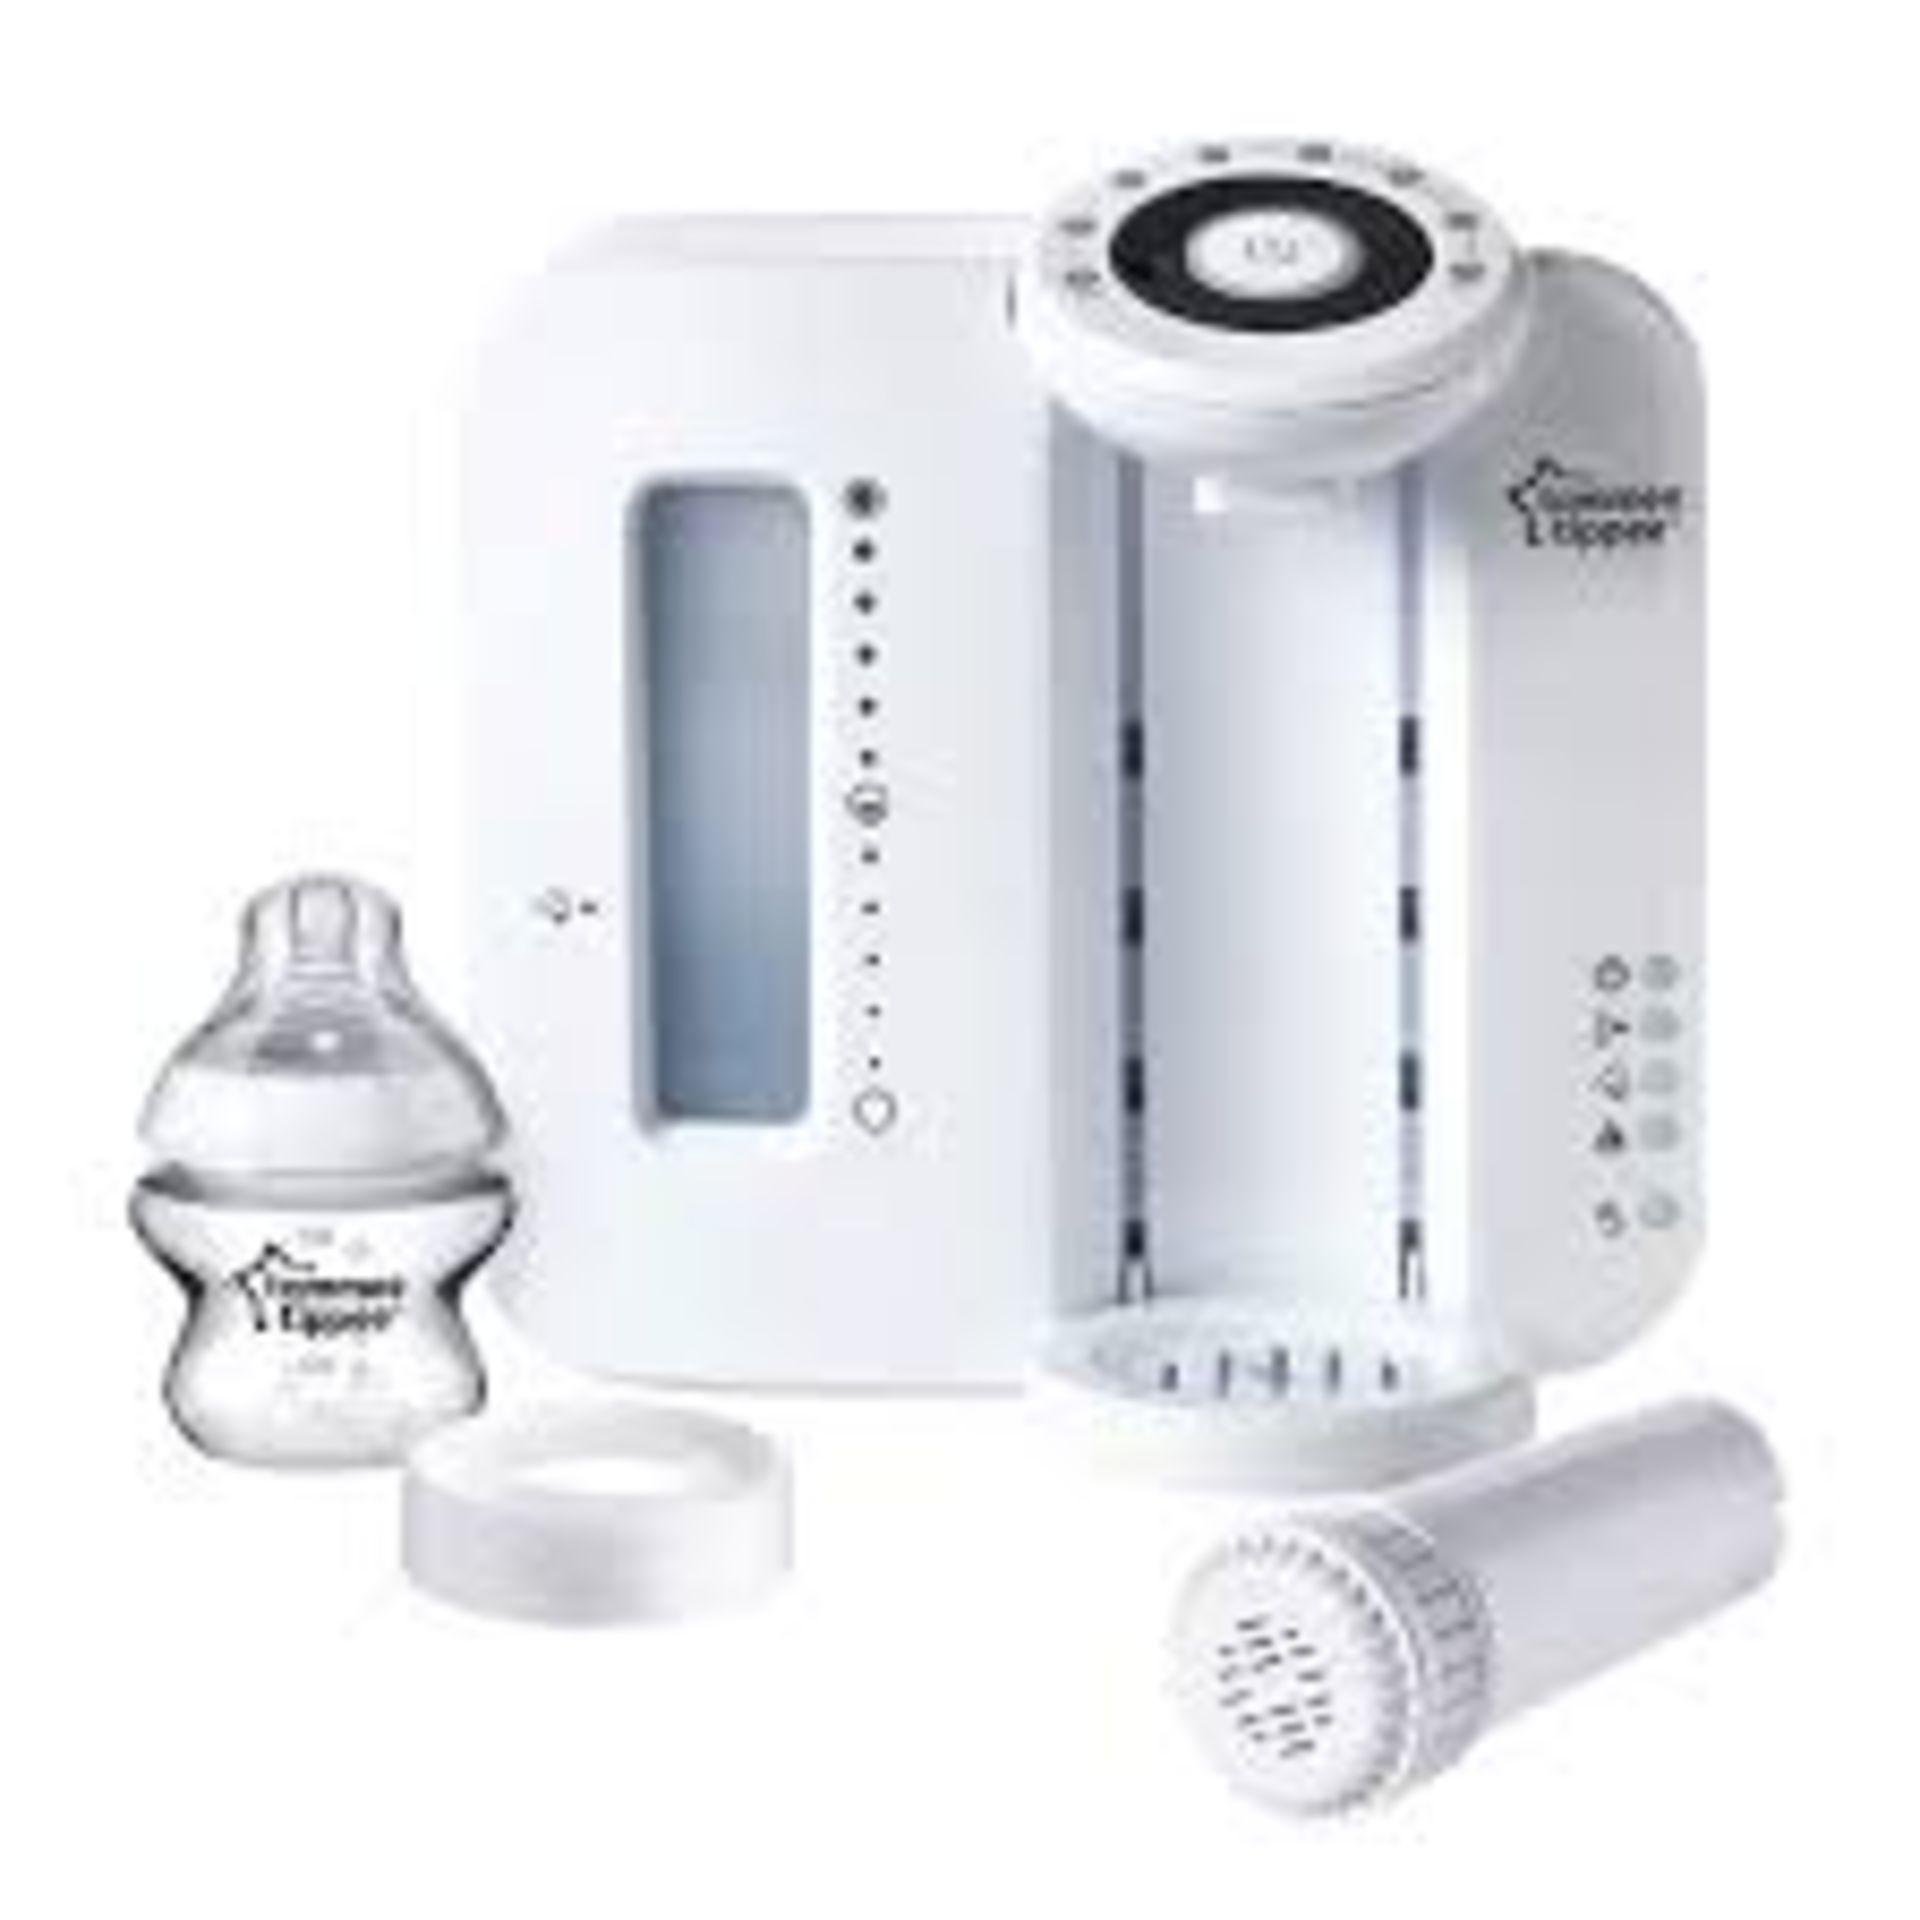 Boxed Tommee Tippee Closer To Nature Complete Feeding Set RRP £65.00 (Retoo620112) (Public Viewing